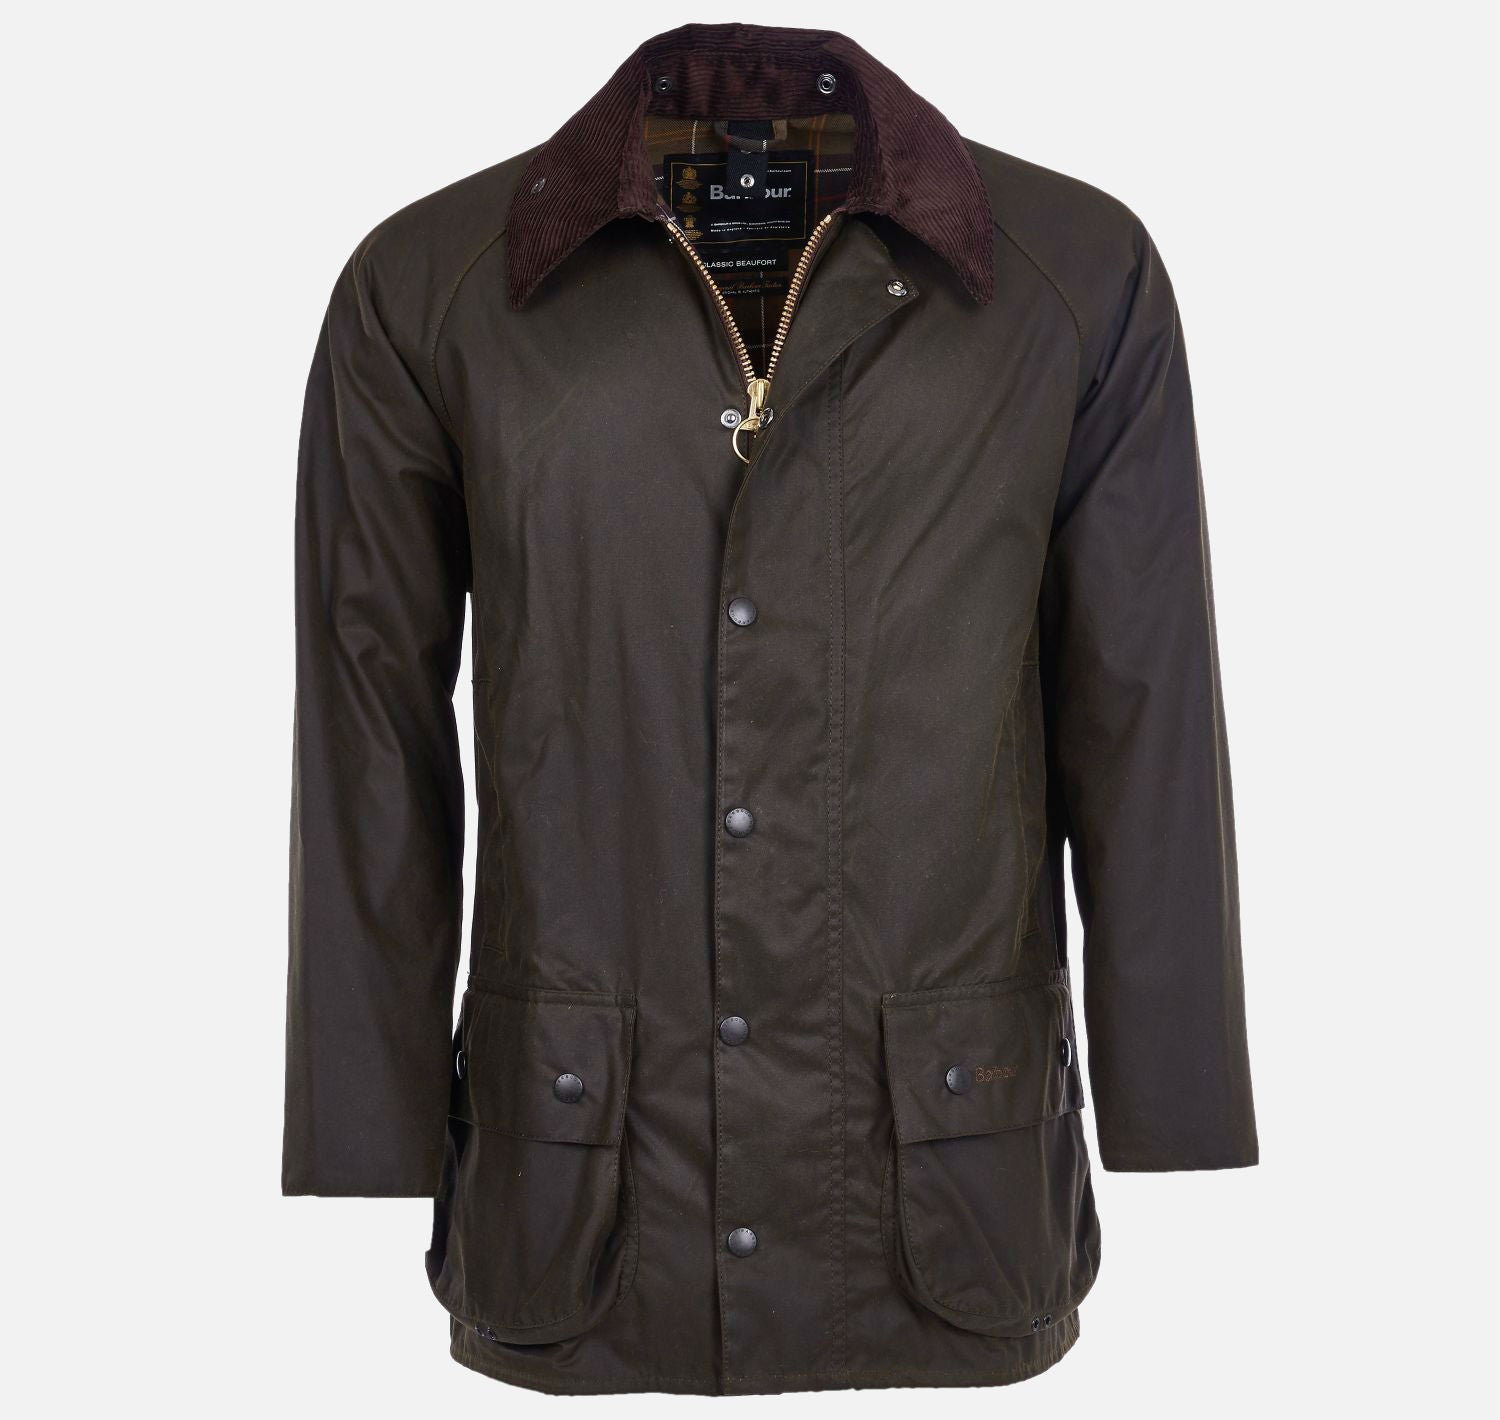 Barbour Classic Beaufort Wax Jacket - Olive - Murray's Toggery Shop